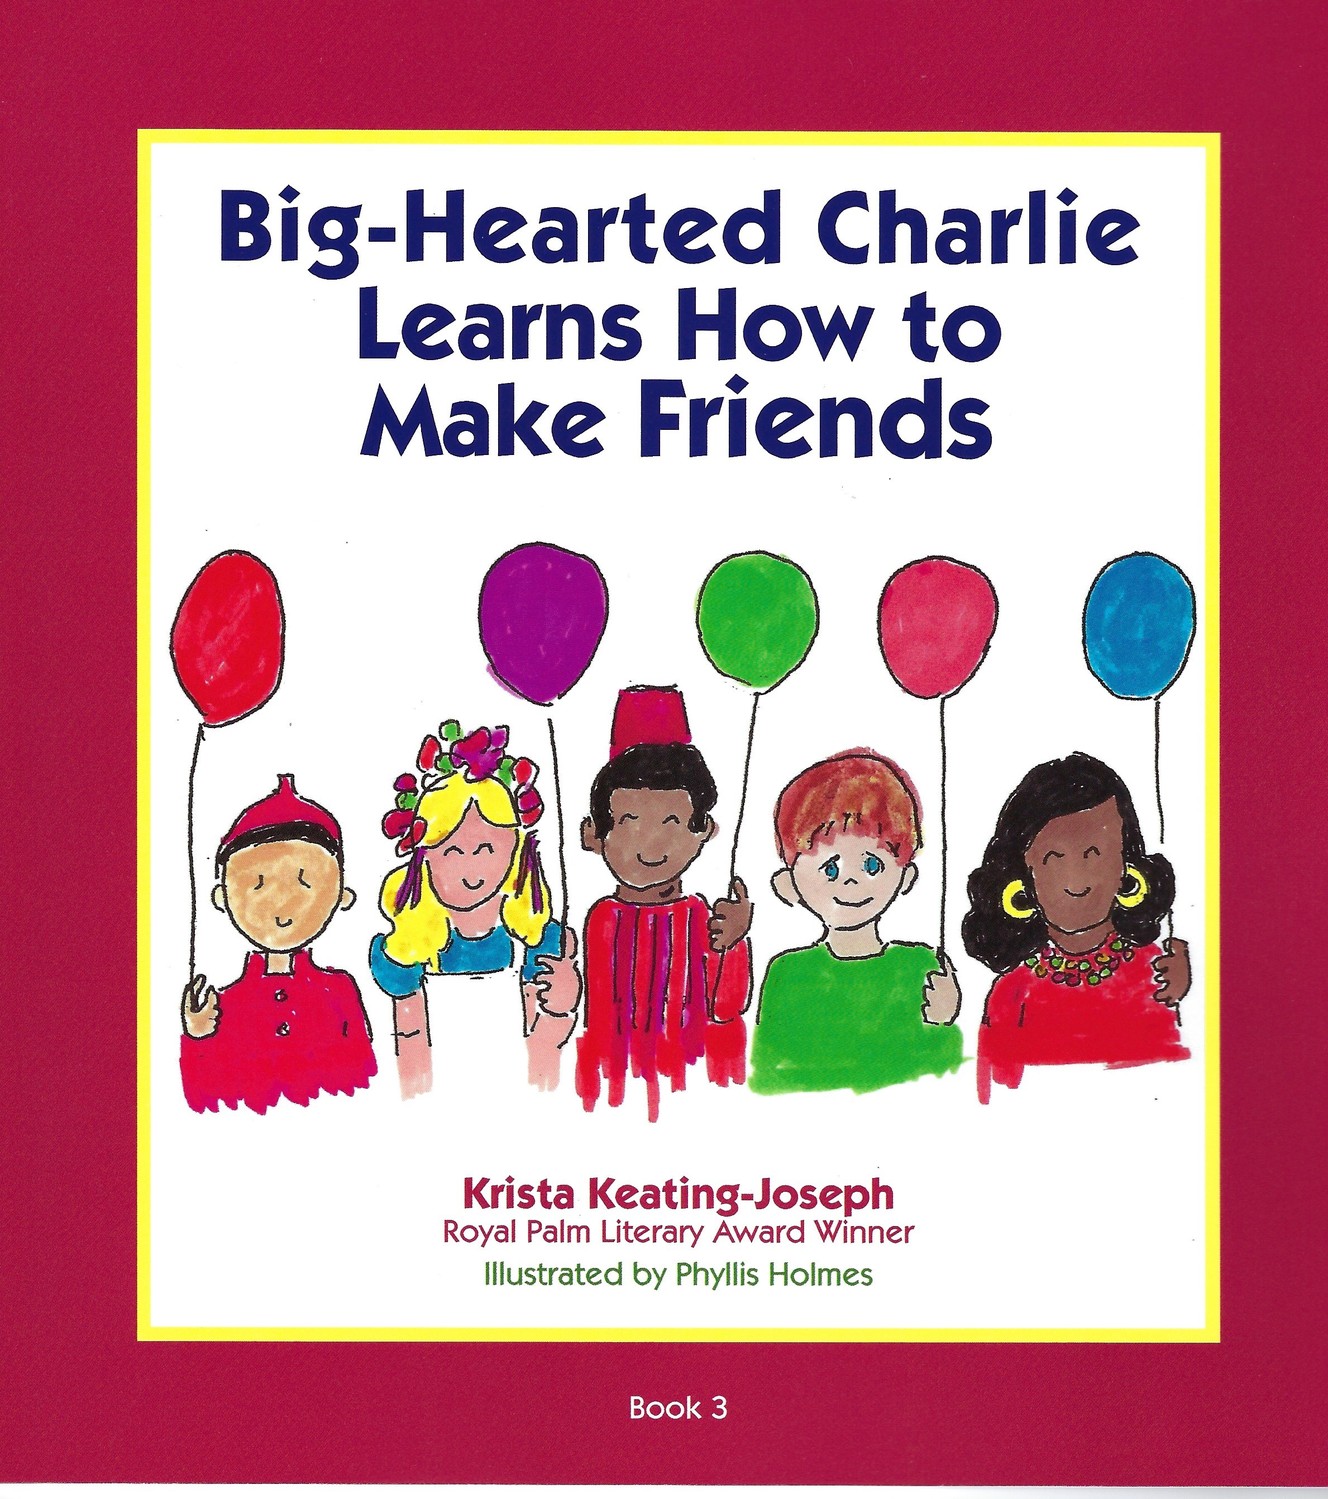 “Big-Hearted Charlie Learns How to Make Friends” is the third in a series of children’s books written by Krista Keating-Joseph in memory of her son.